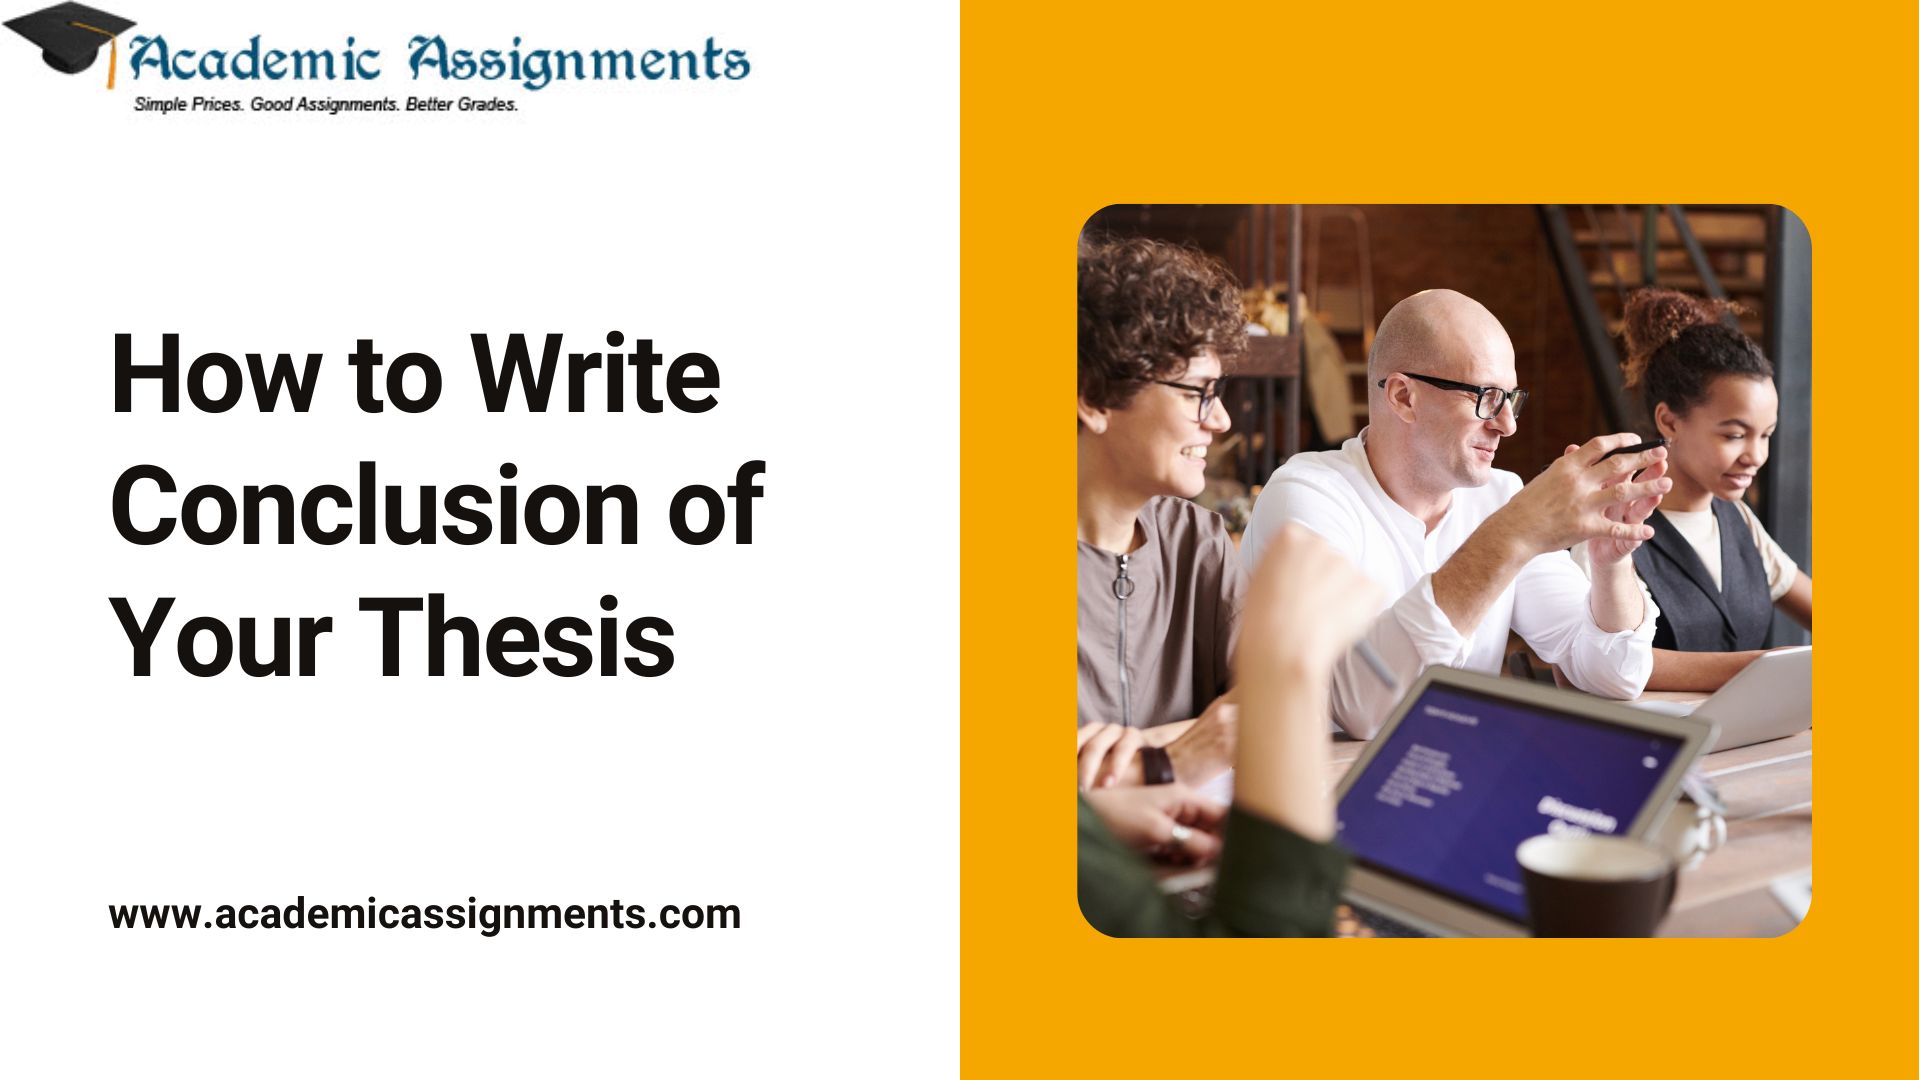 How to Write Conclusion of Your Thesis